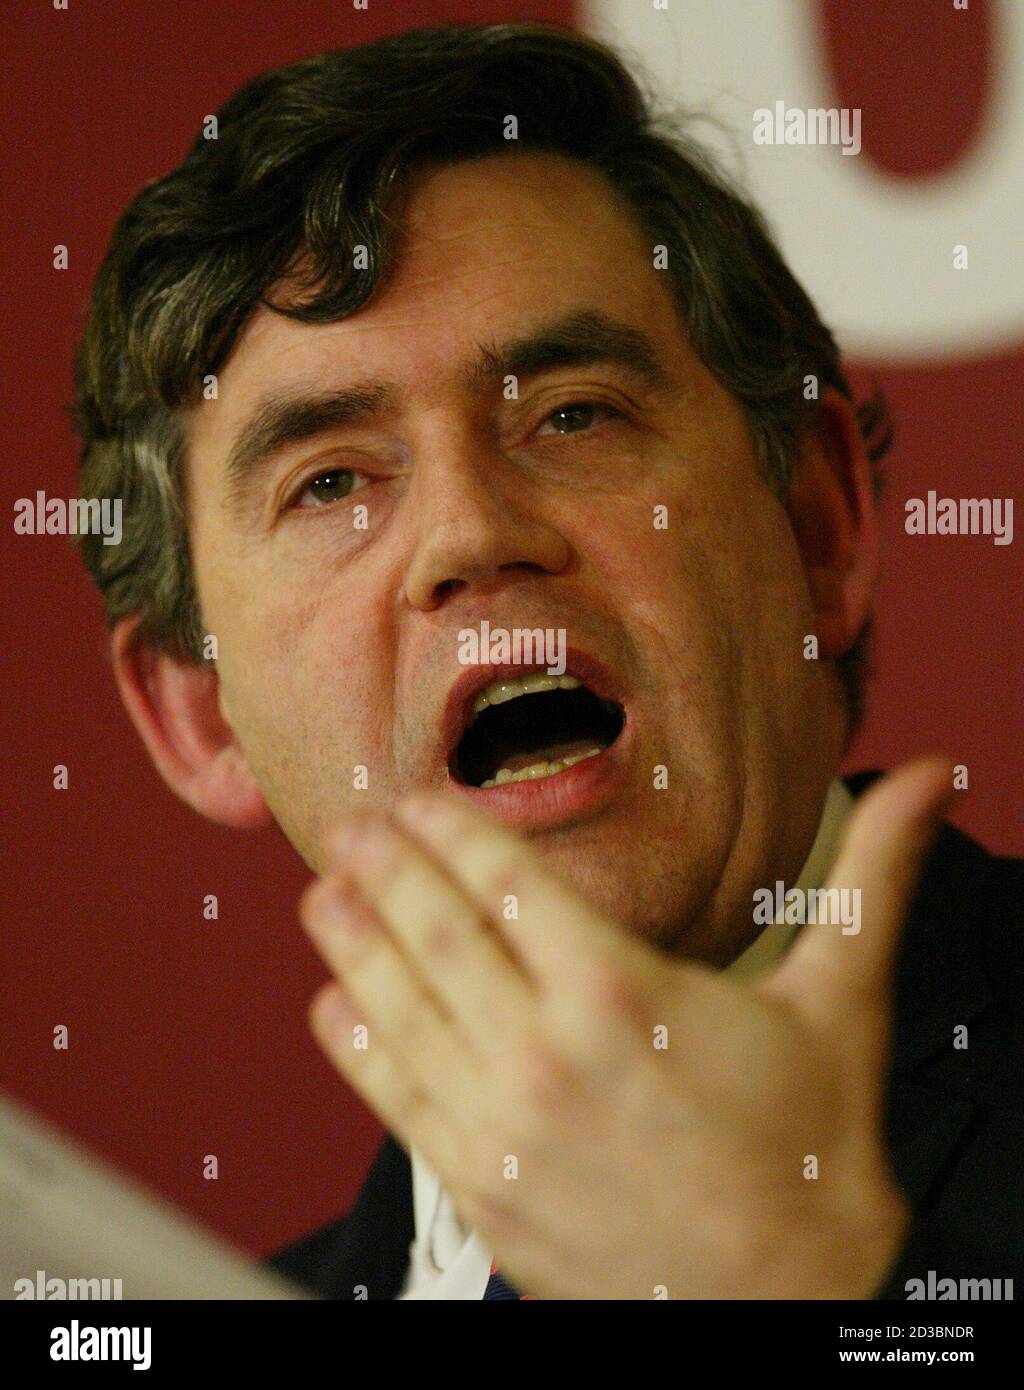 Britain's Chancellor of the Exchequer Gordon Brown addresses the Social Market Foundation in London February 3, 2003. Brown fought back in his address over accustaitons that he had lost control of public finances and the British economy stating that 'The true test of a policy is whether it can cope with diffucult as well as good times'. REUTERS/John Pryke  JDP/NMB Stock Photo